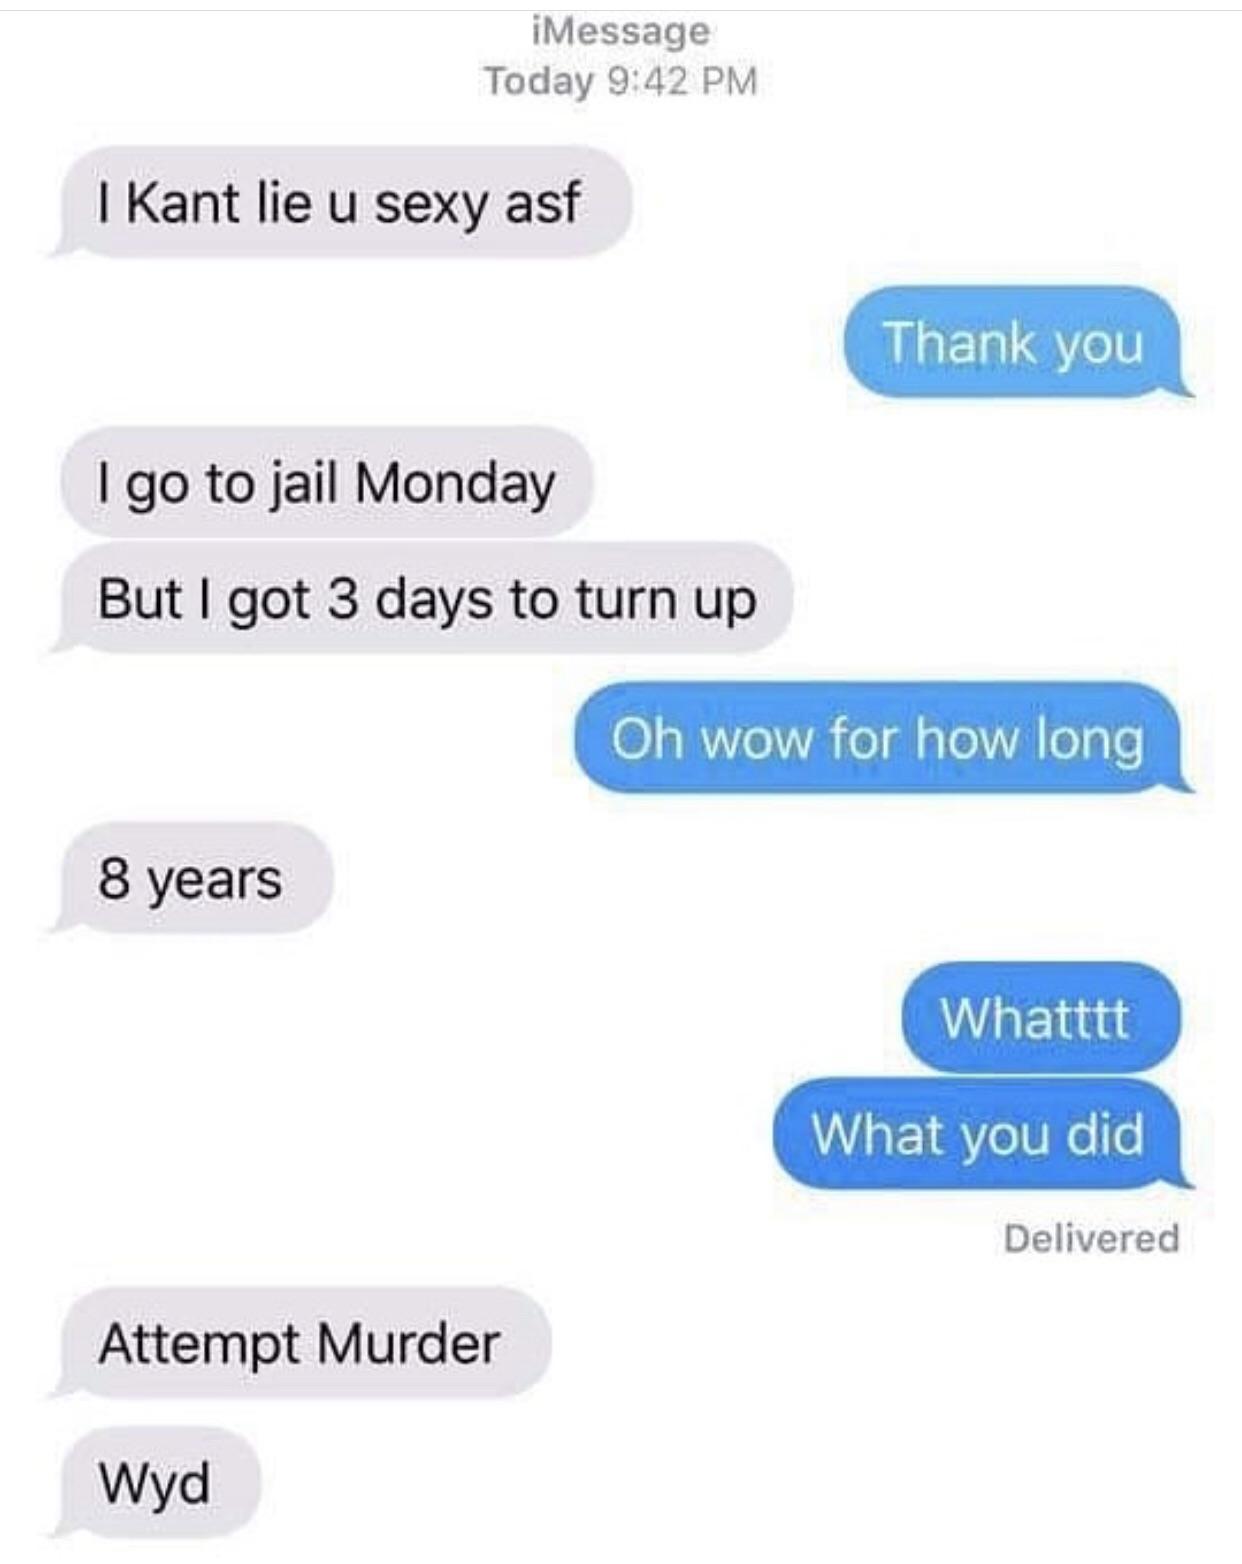 number - iMessage Today I Kant lie u sexy asf Thank you I go to jail Monday But I got 3 days to turn up Oh wow for how long 8 years Whatttt What What you did Delivered Attempt Murder Wyd